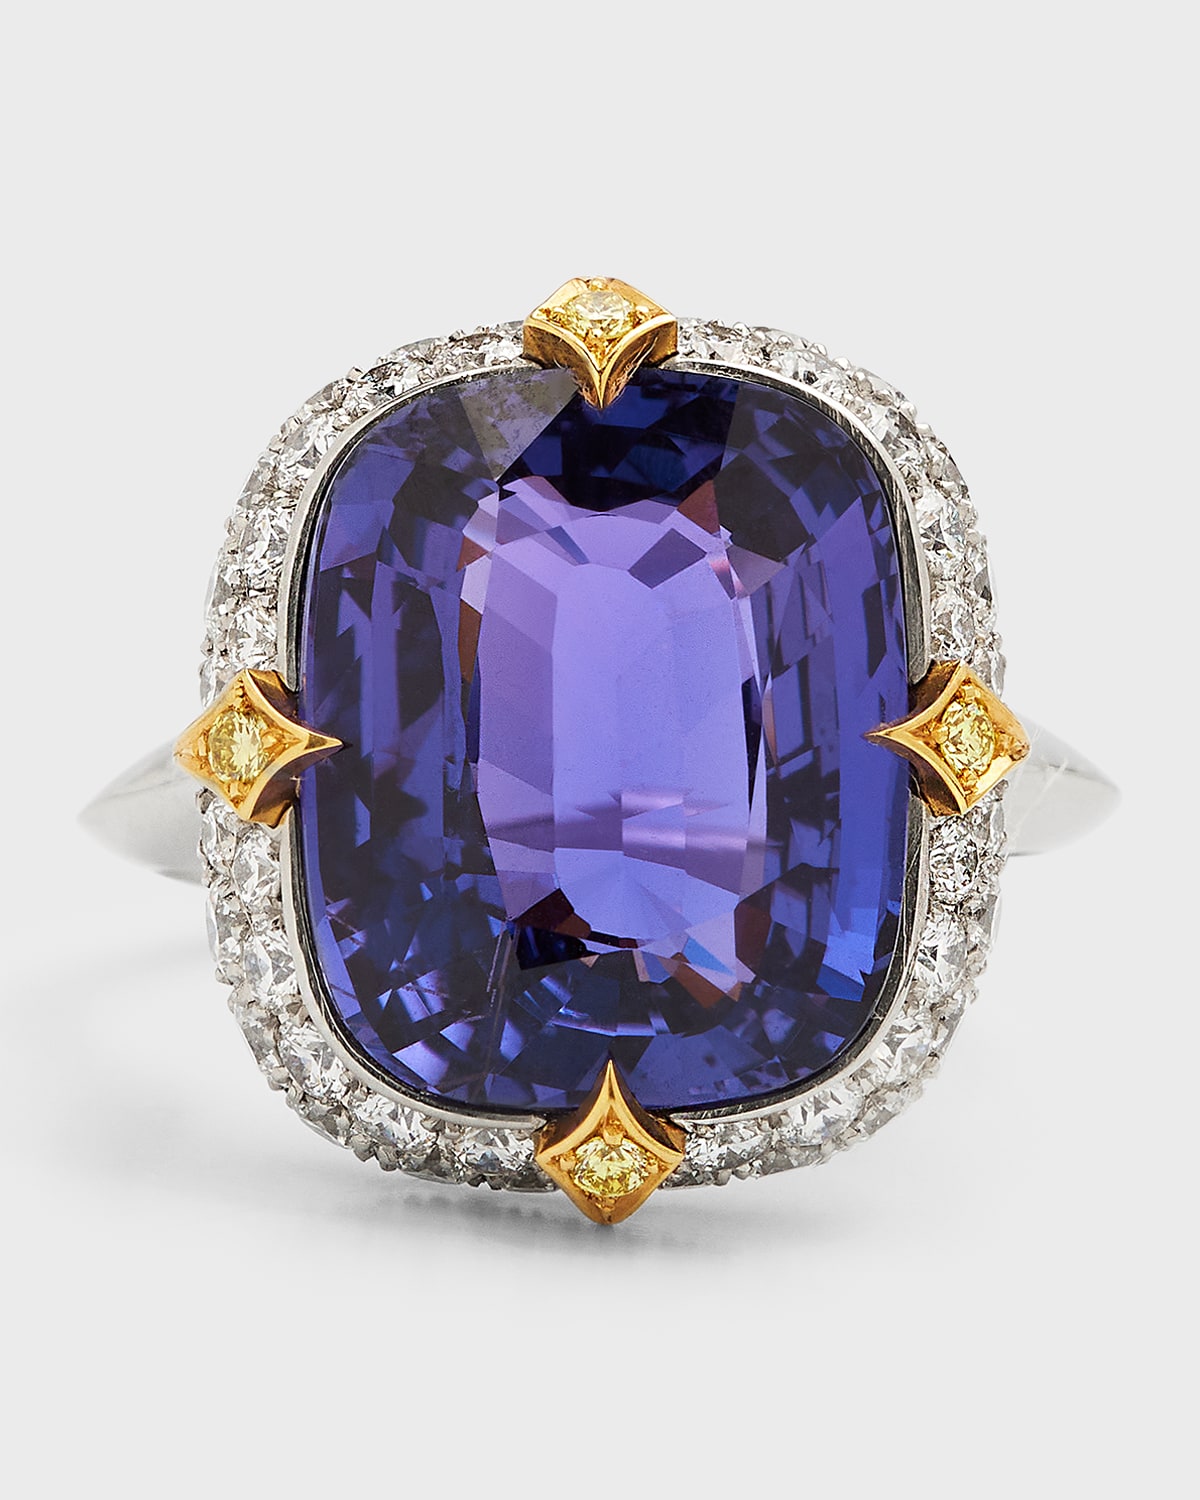 Platinum and Yellow Gold Purple Sapphire Ring with Diamonds, Size 5.75